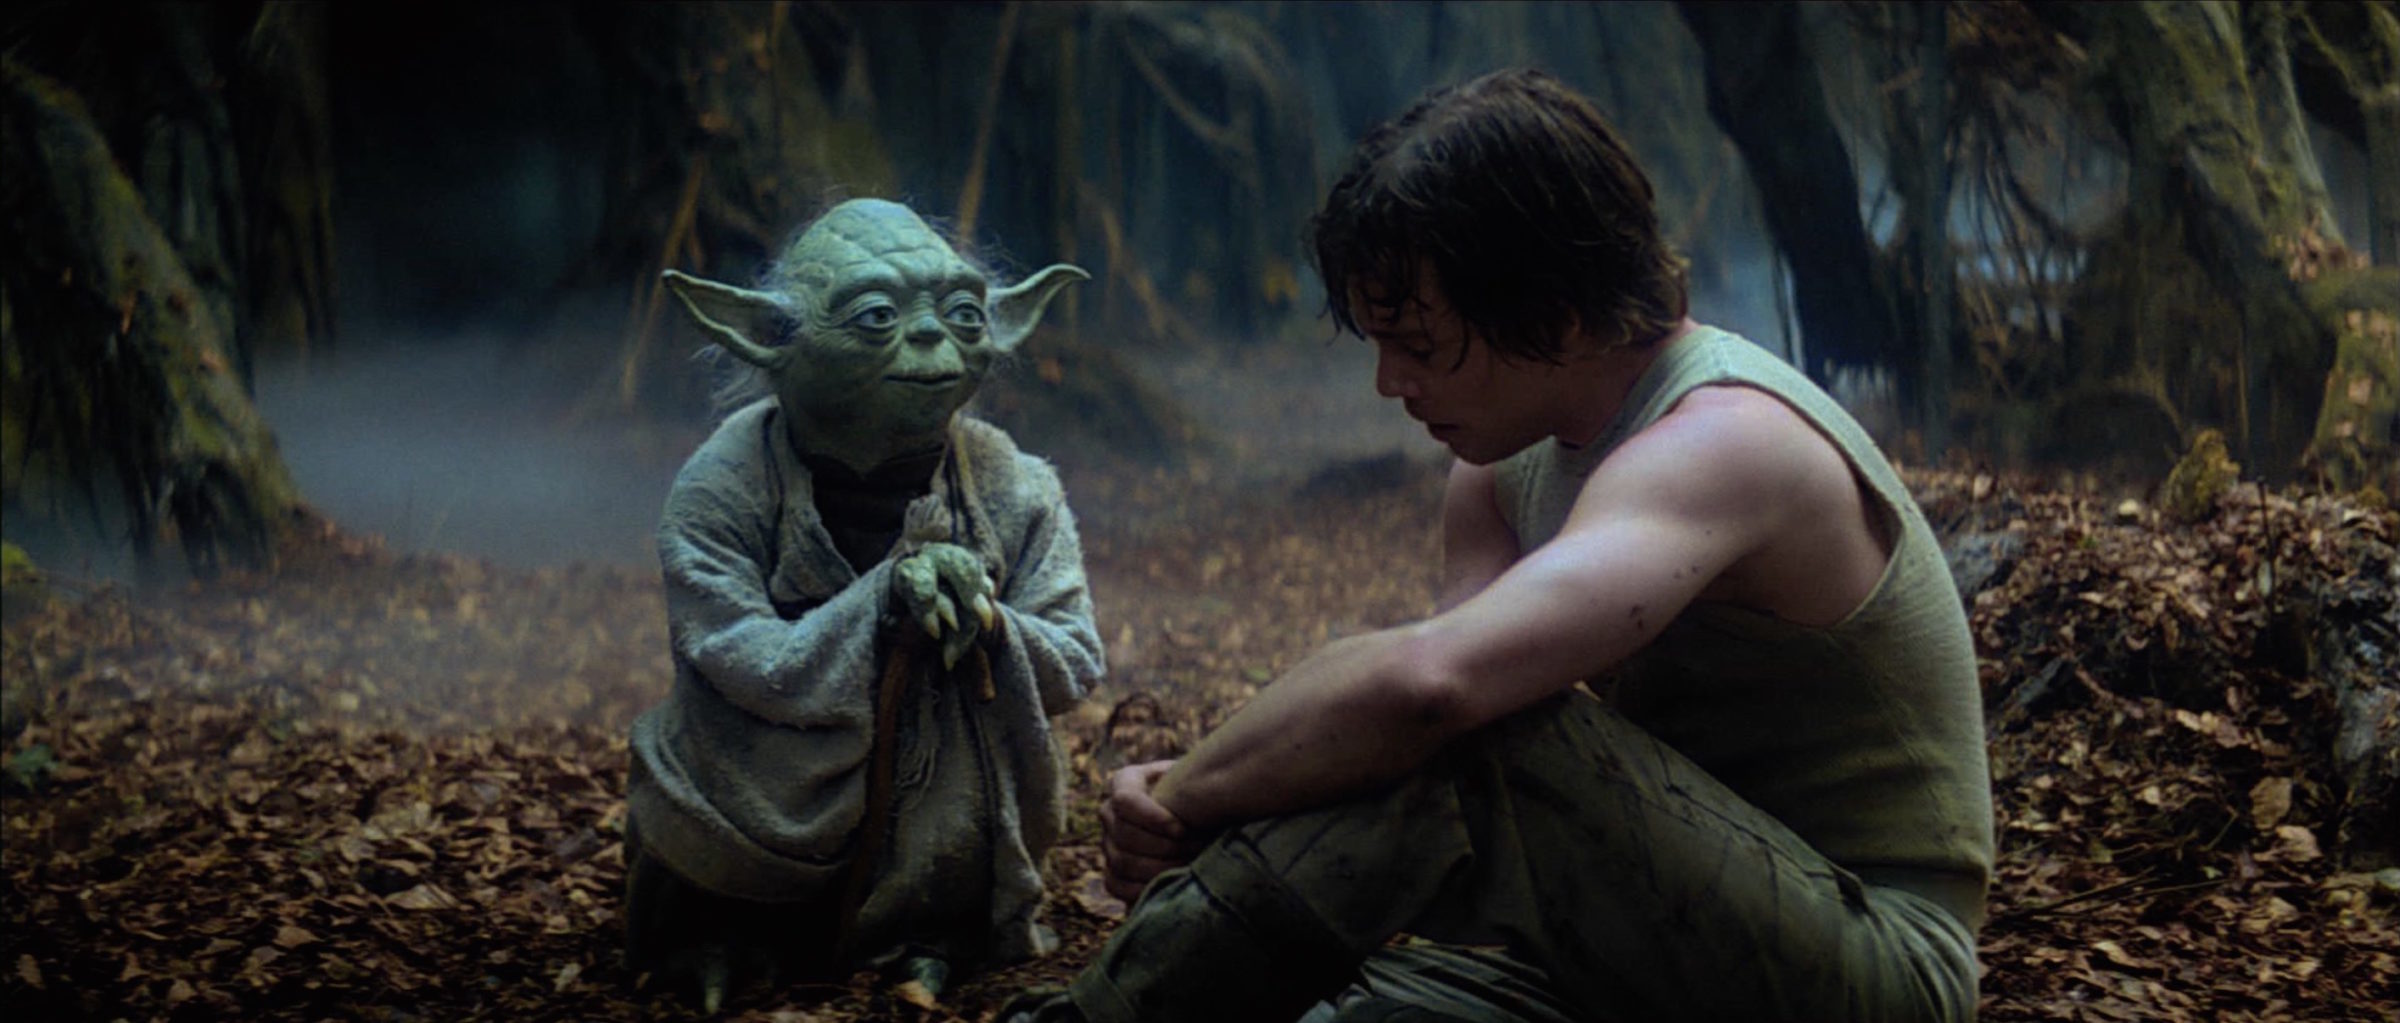 Leaning on his walking stick, Yoda talks to a dejected Luke who sits on the ground on swampy Dagobah in The Empire Strikes Back.